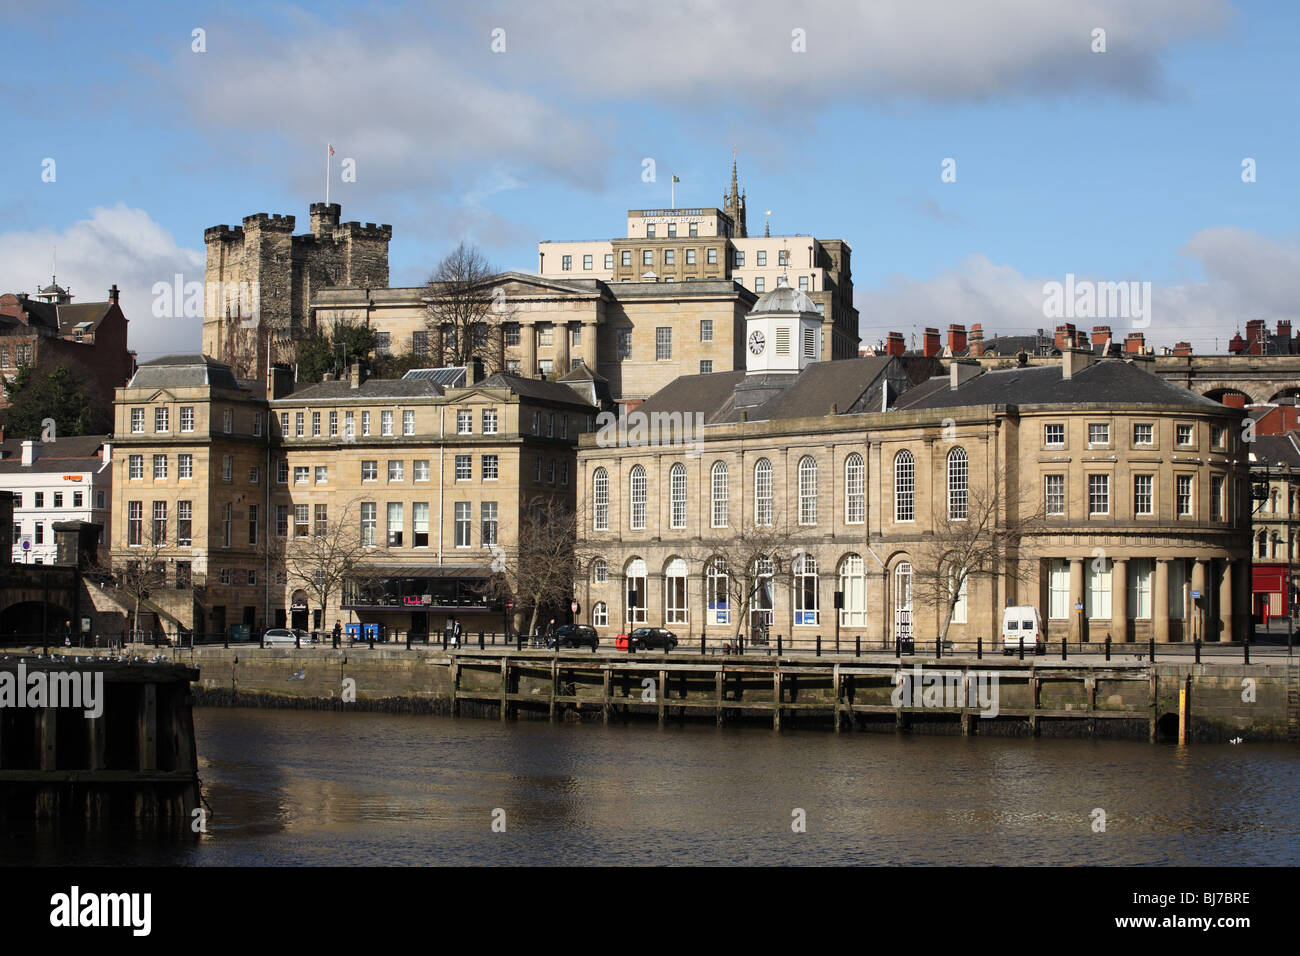 Newcastle upon Tyne quayside with the guildhall in the foreground and the Castle Keep in the background. Stock Photo